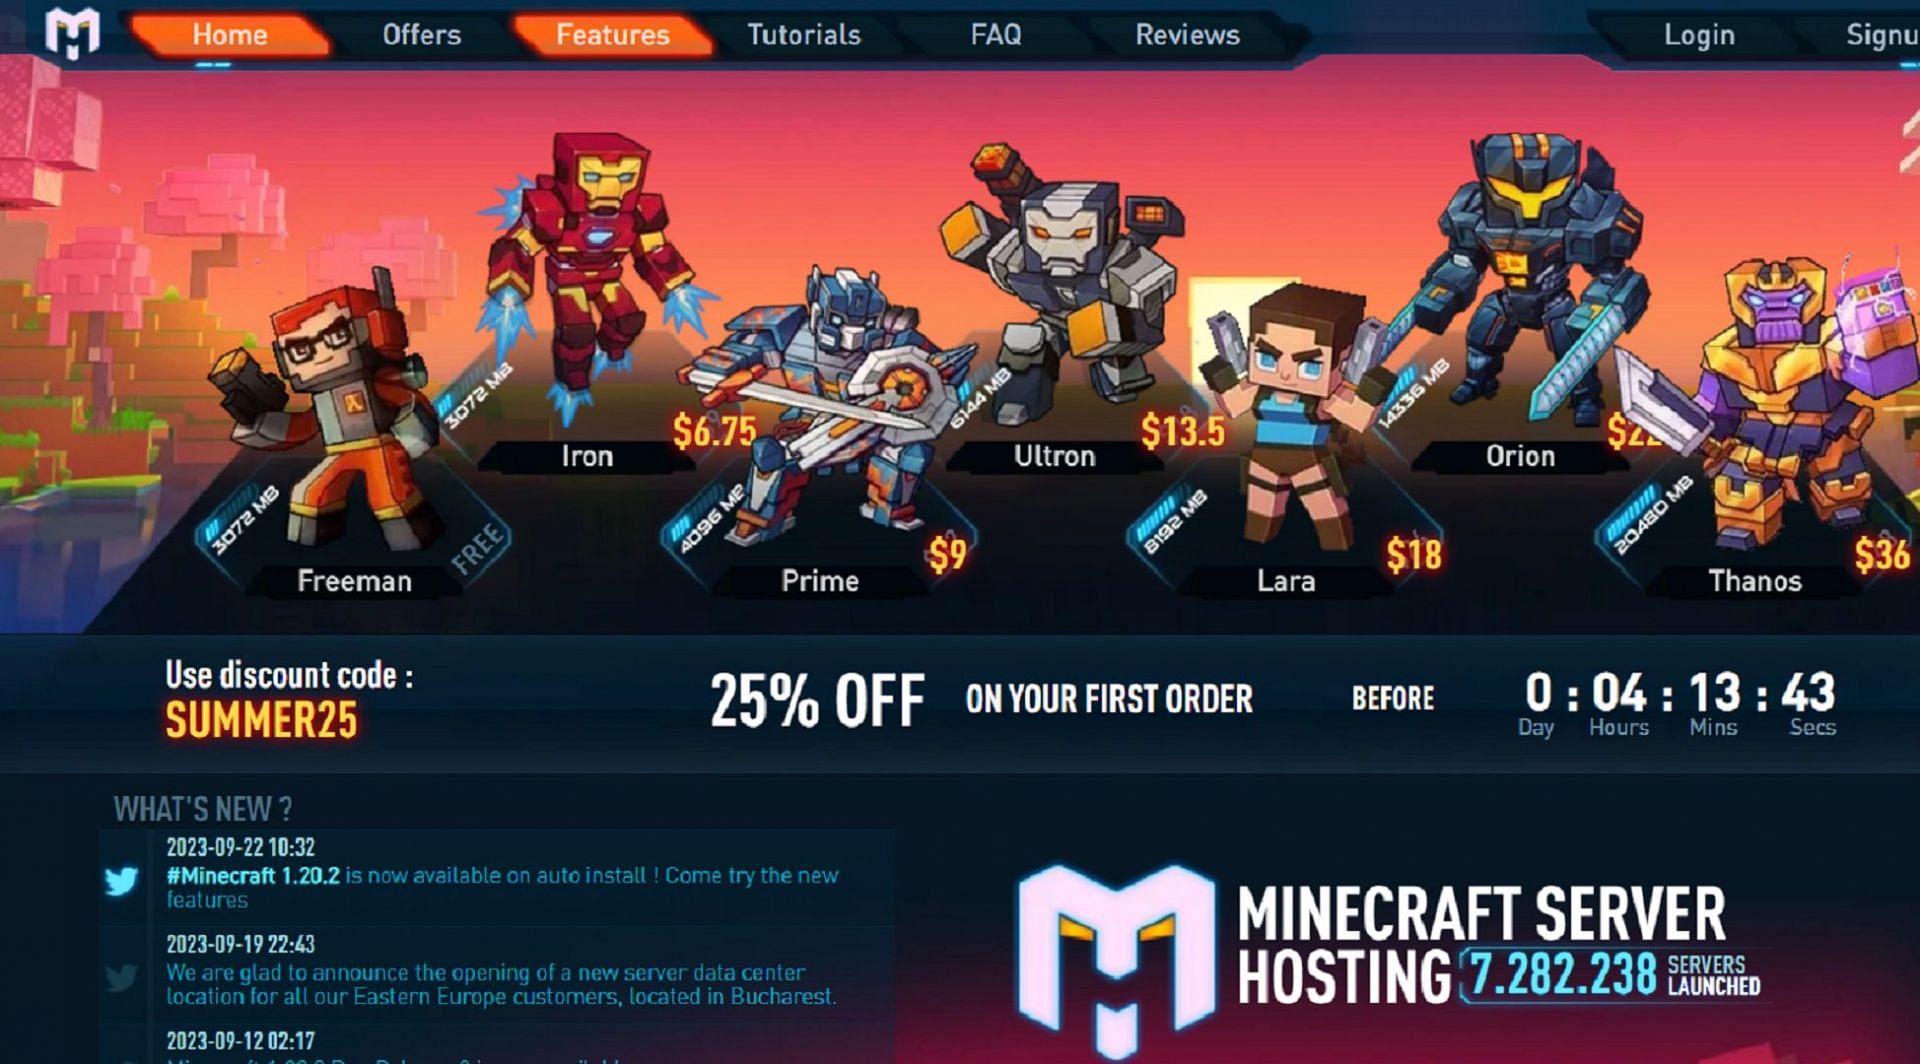 Minecraft Hosting Pro offers solid deals and plenty of server features (Image via Minecraft Hosting Pro)